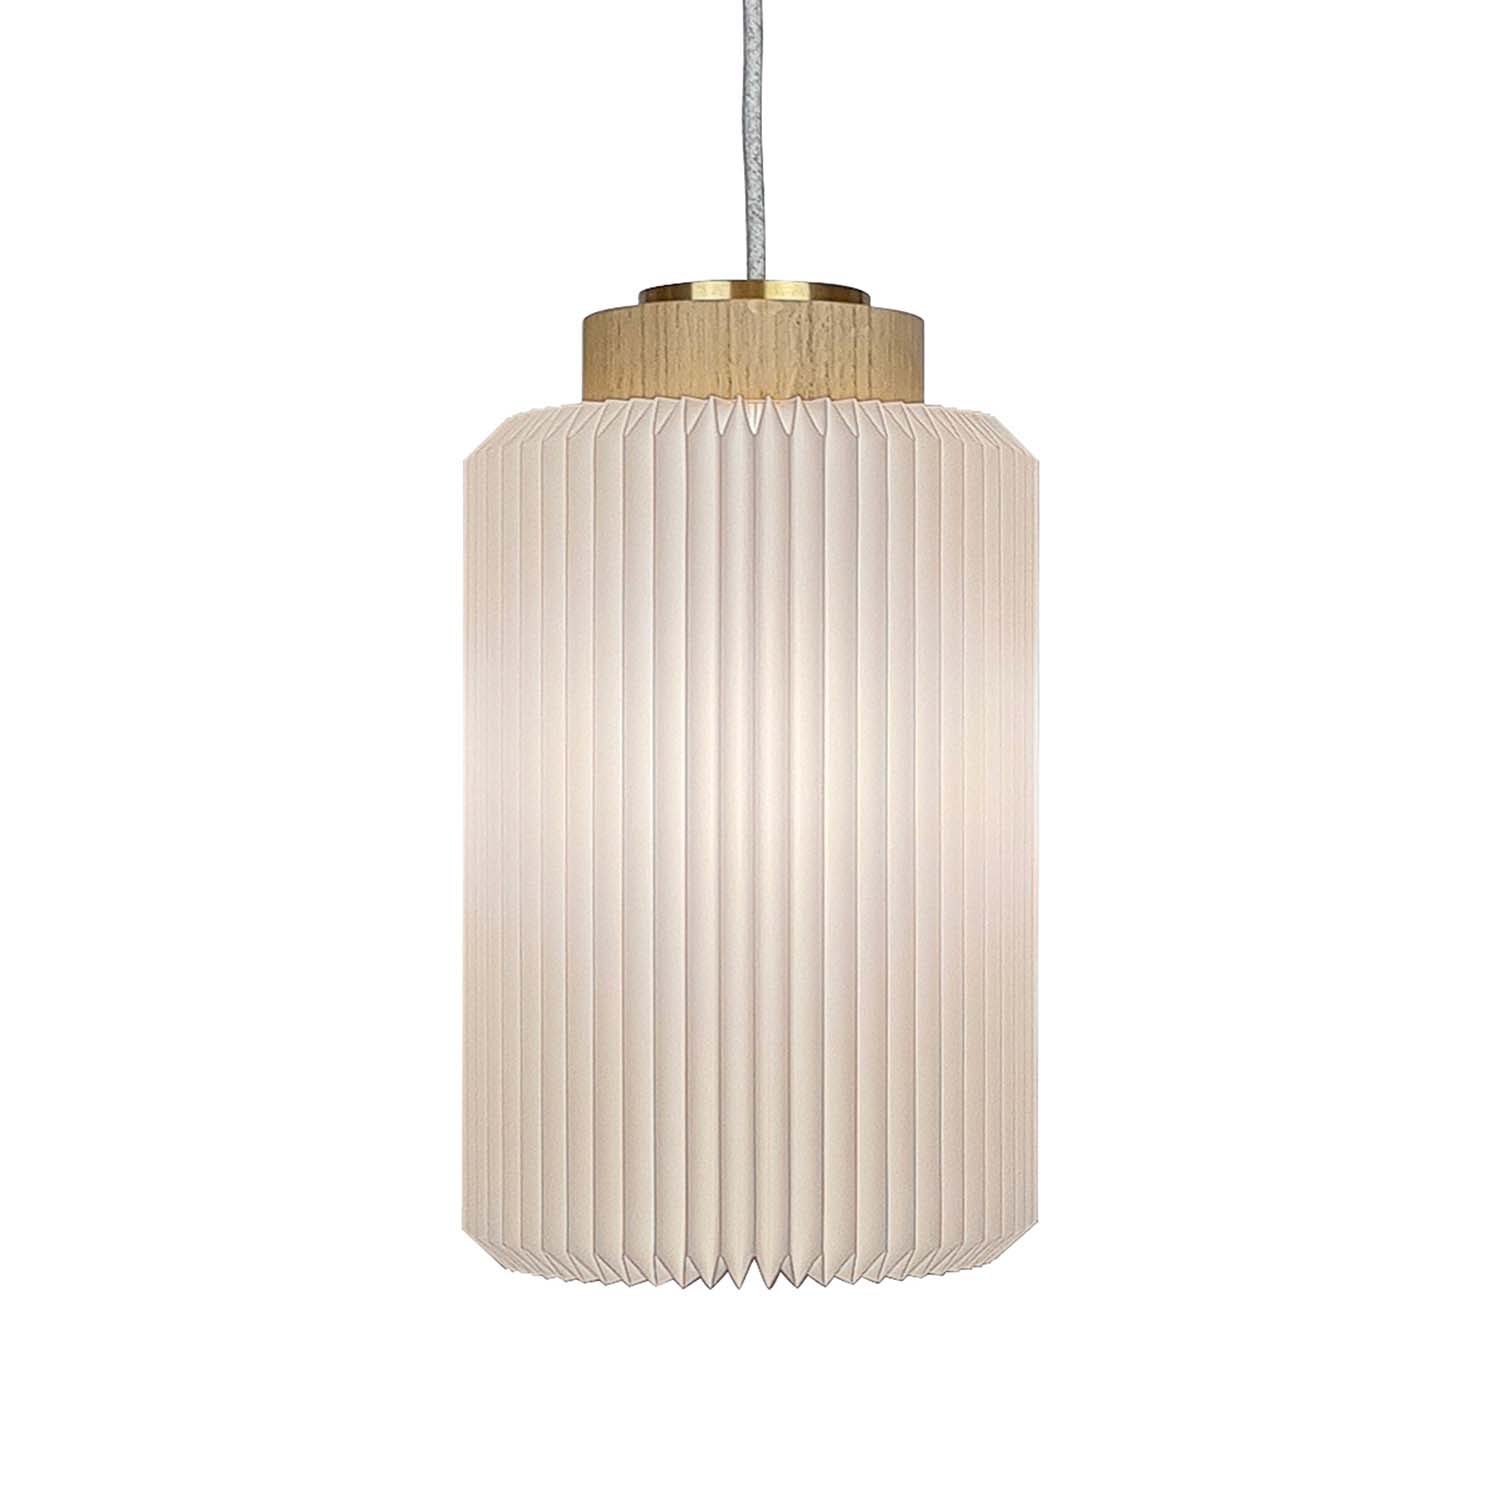 CYLINDER 182 - Cylindrical lantern pendant light in pleated PVC, Zen style